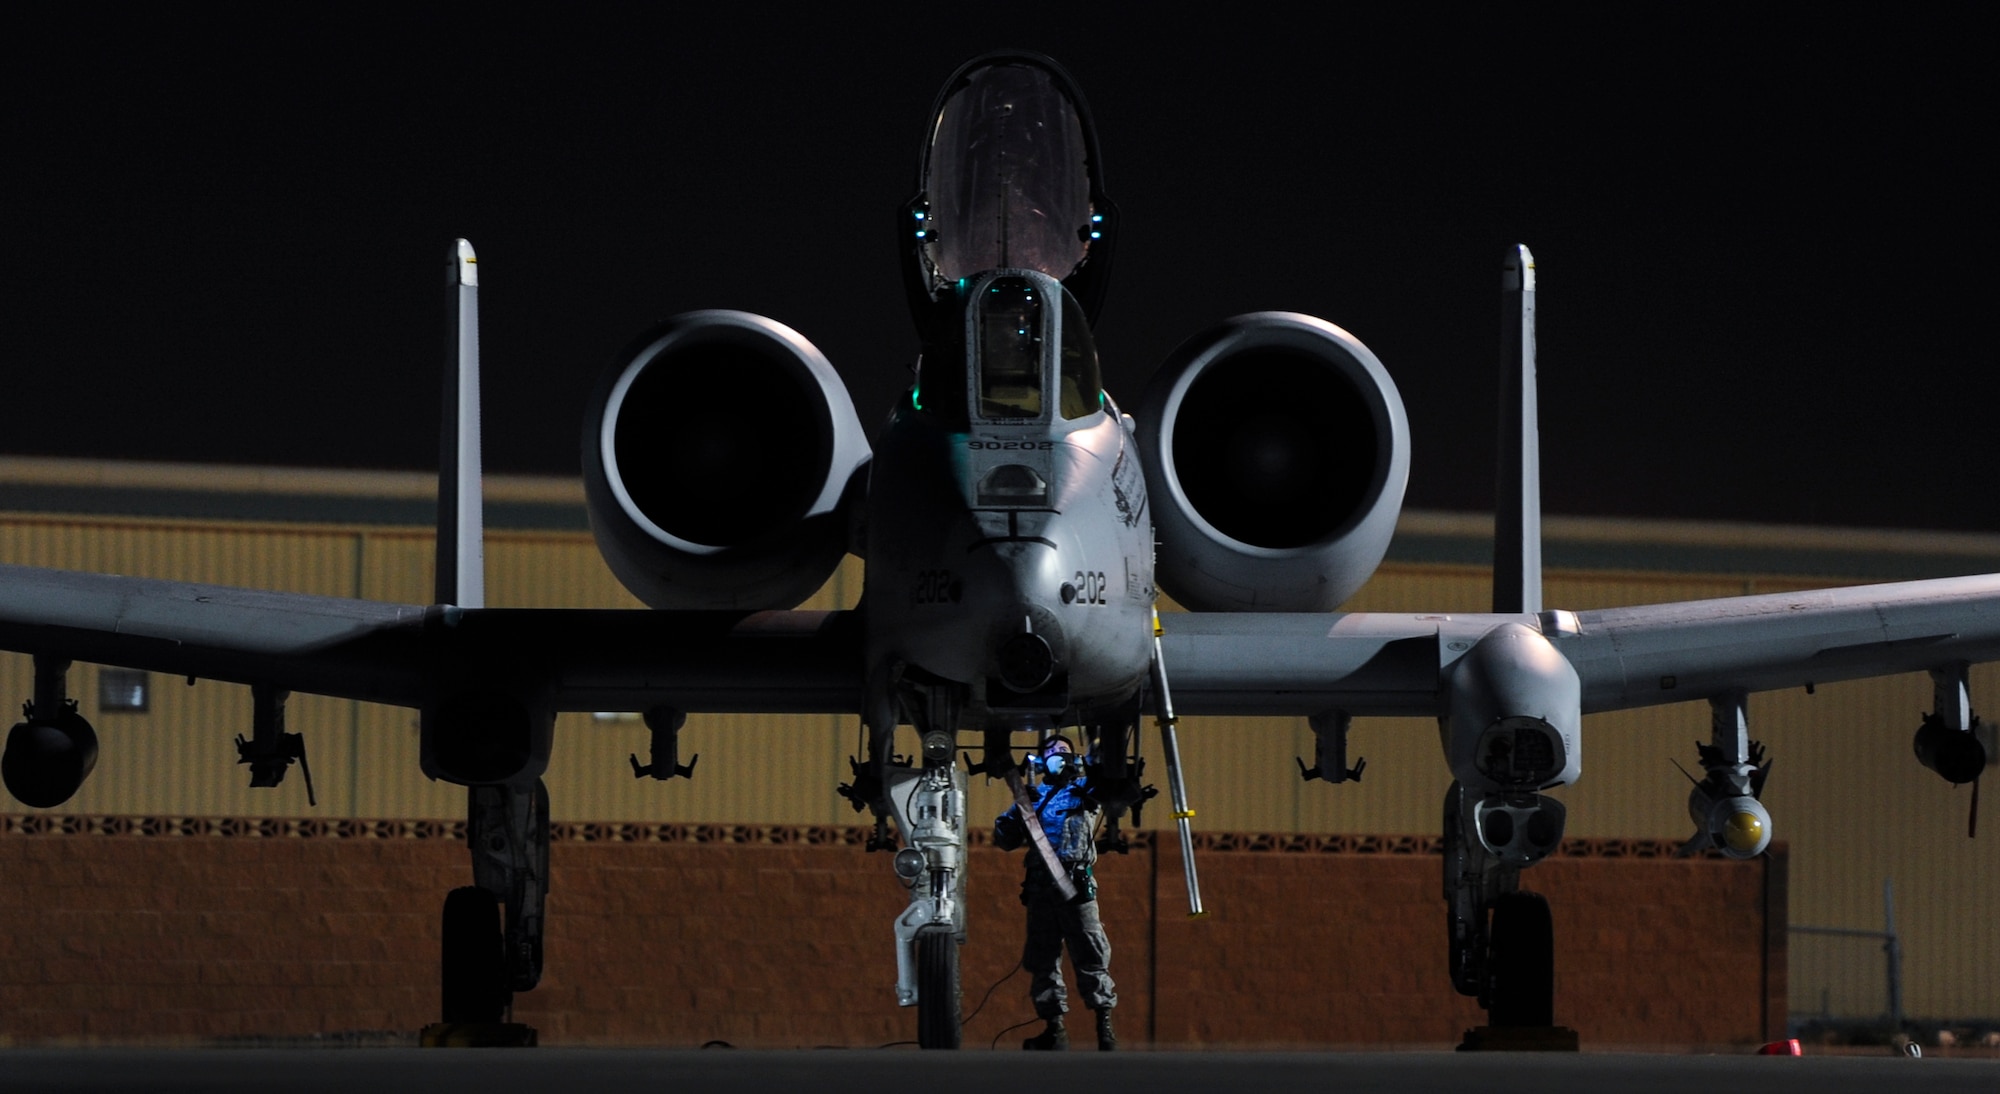 An Airman assigned to 355th Aircraft Maintenance Squadron, Davis-Monthan Air Force Base, Ariz., prepares an A-10 Thunderbolt II to participate in Green Flag 17-01 at Nellis Air Force Base, Nev., Oct. 4, 2016. During exercise execution, Green Flag staff direct, monitor and instruct visiting units in the conduct of air operations in support of ground forces. (U.S. Air Force photo by Airman 1st Class Kevin Tanenbaum/Released)